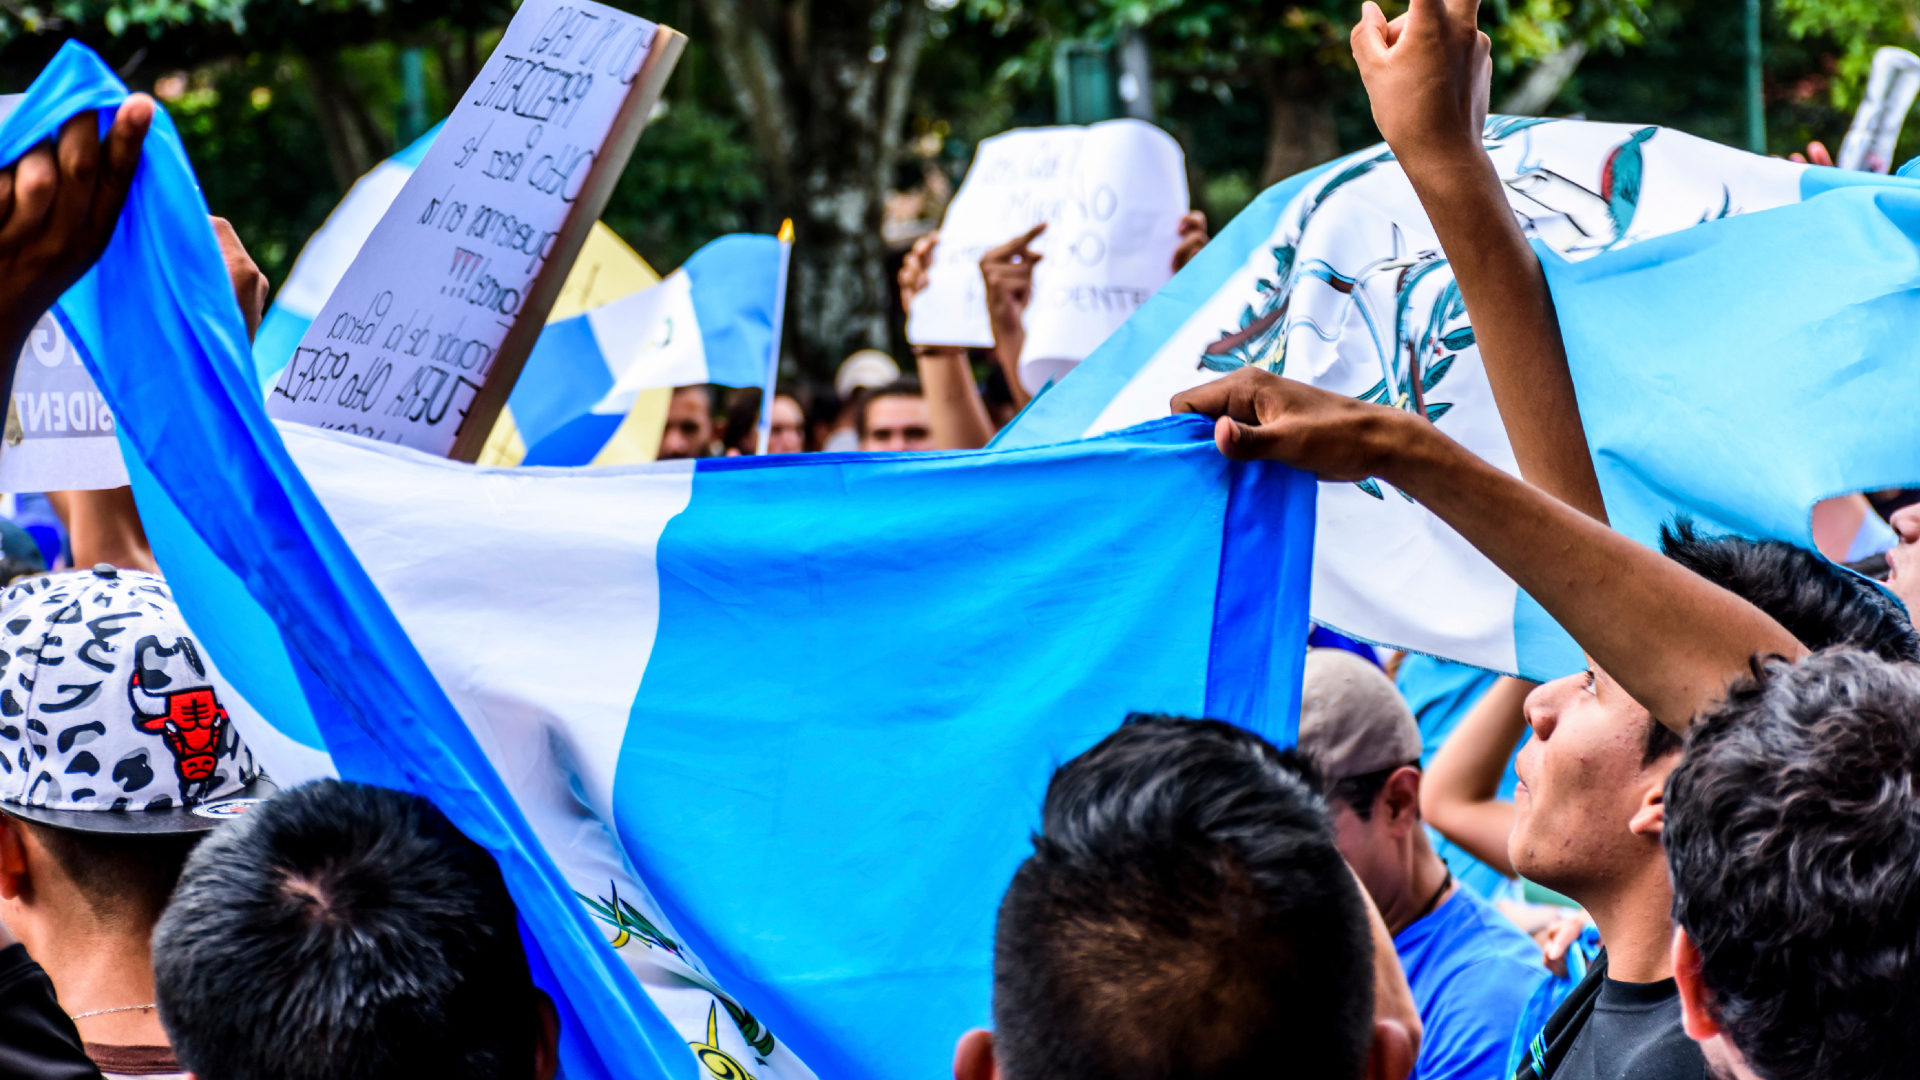 Guatemala: Human Rights reporting for journalists in disputed areas